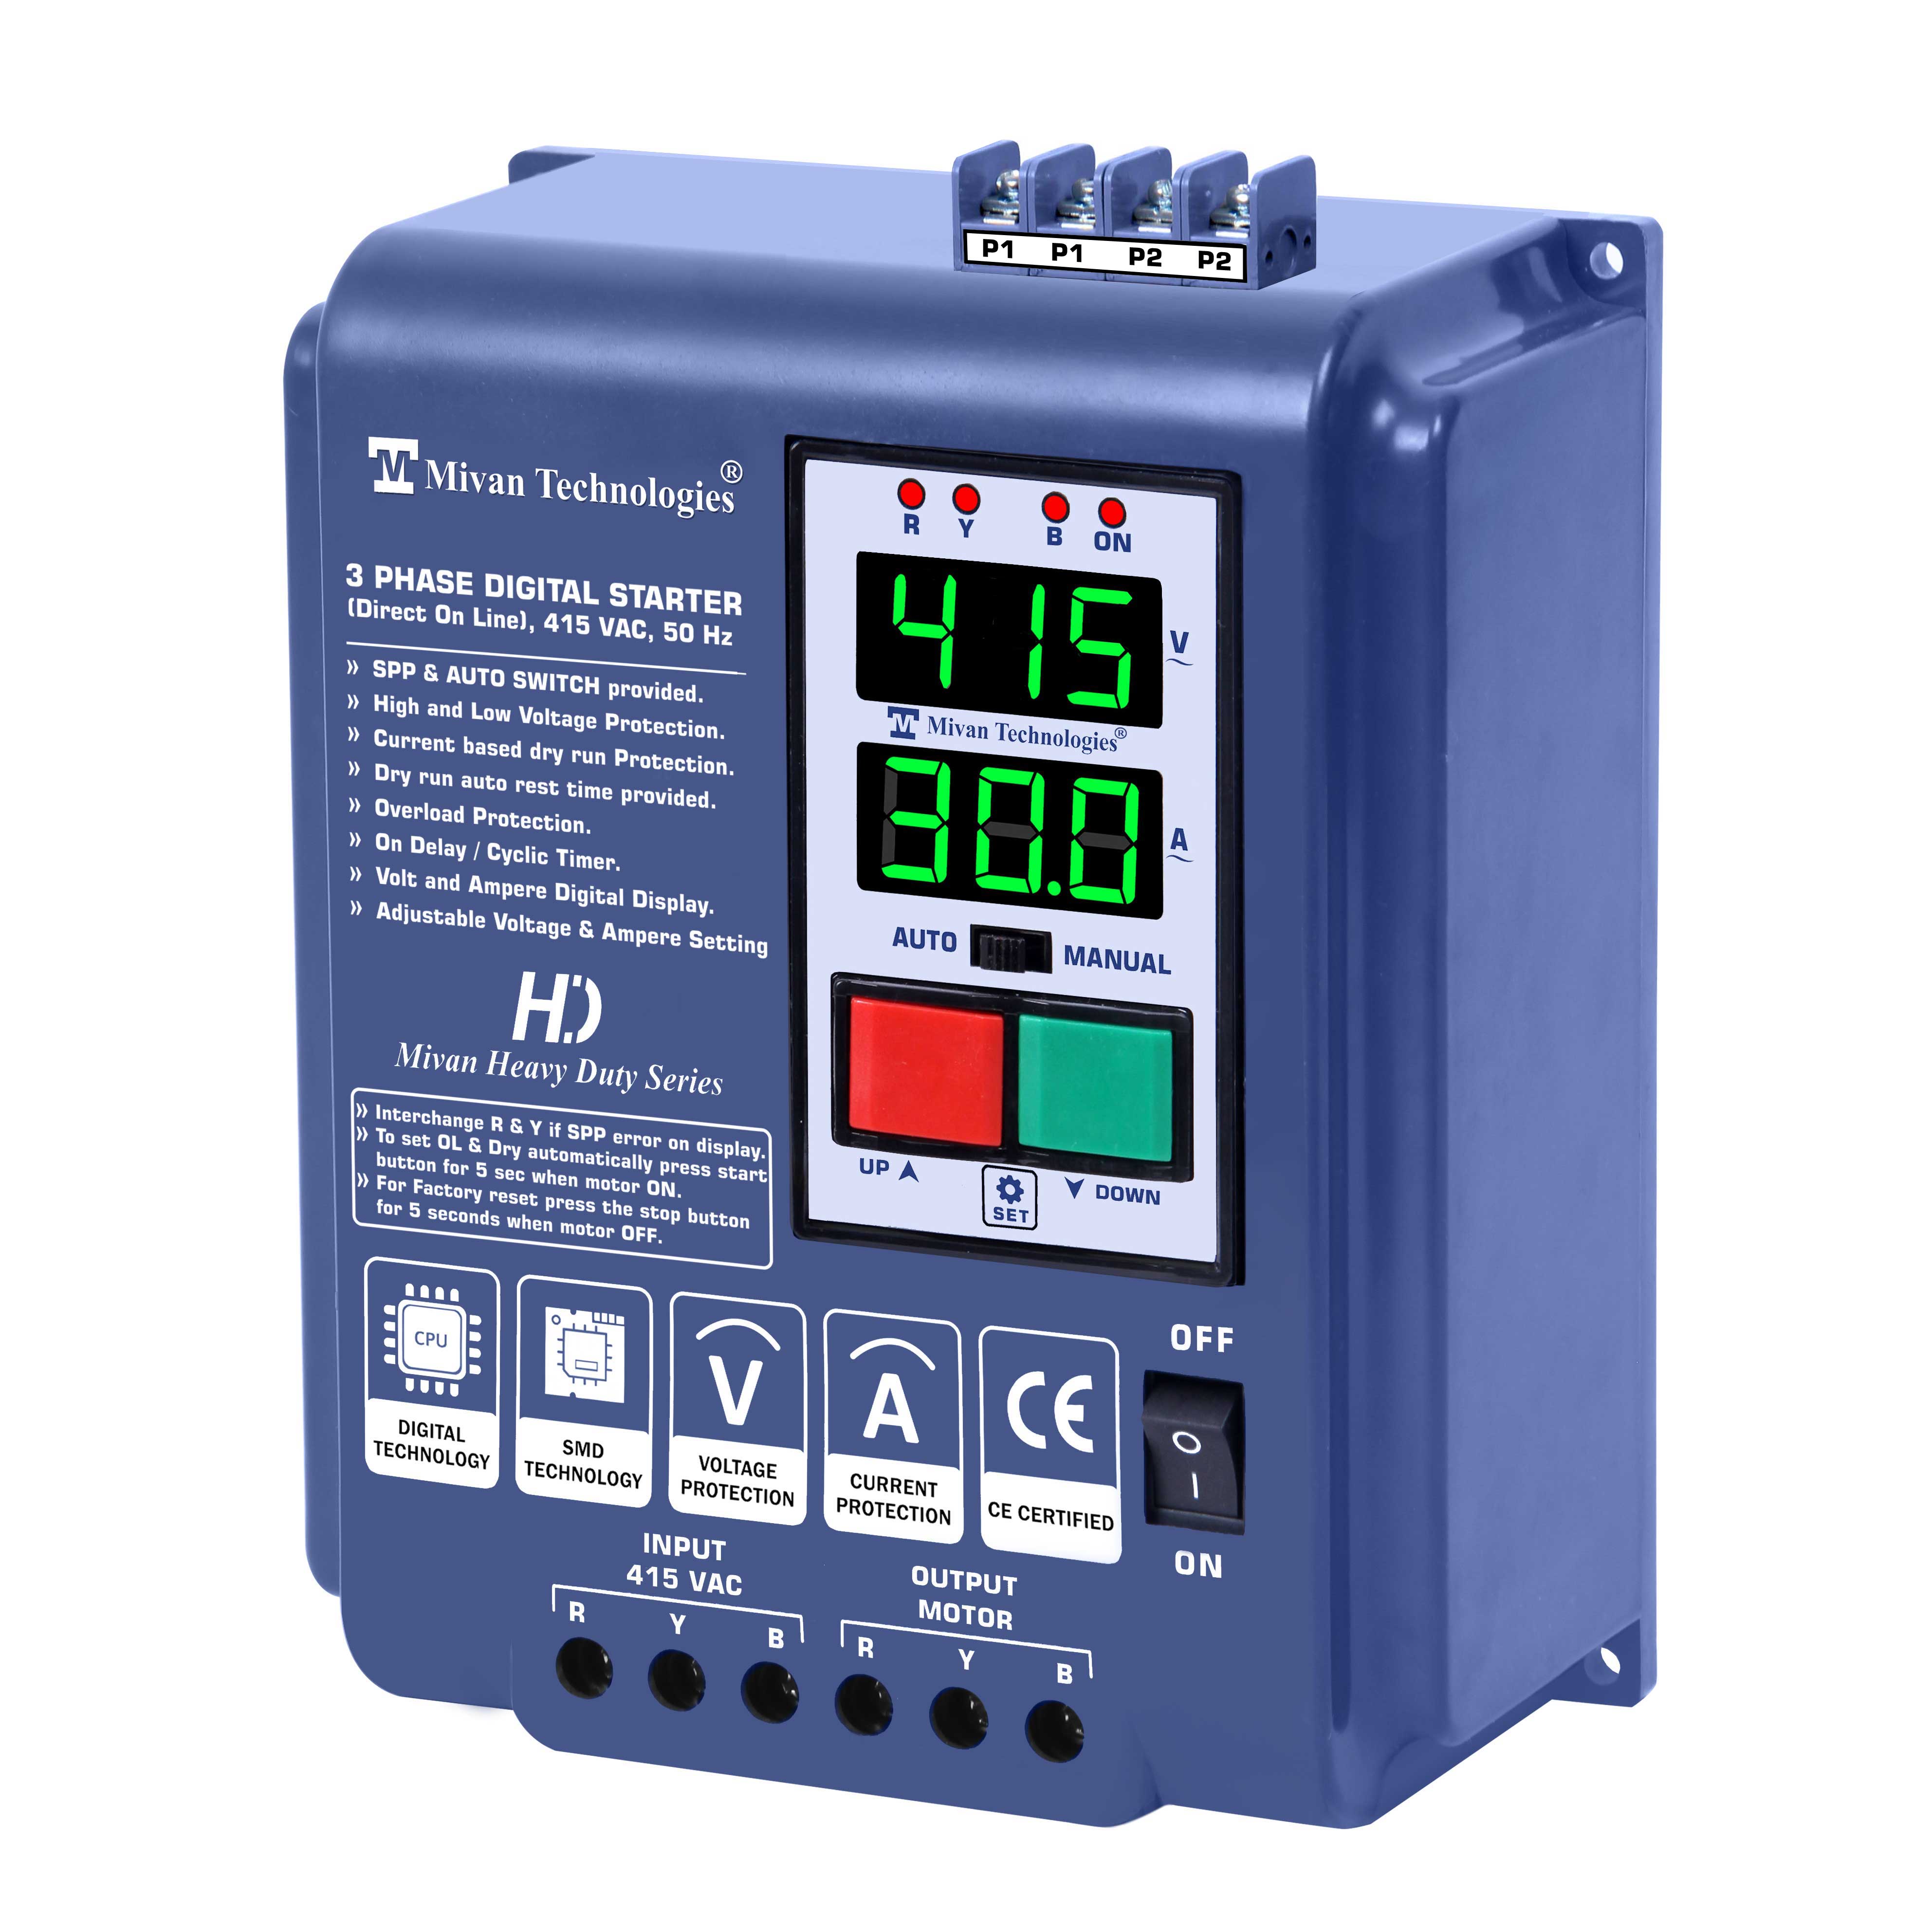 DP 301S PN HD  3 Phase DOL Digital Starter with pressure switch input for 3 Phase Motor Suitable up to 10 hp Motor with HV LV OL Dry protections with SPP Auto switch and cyclic timer